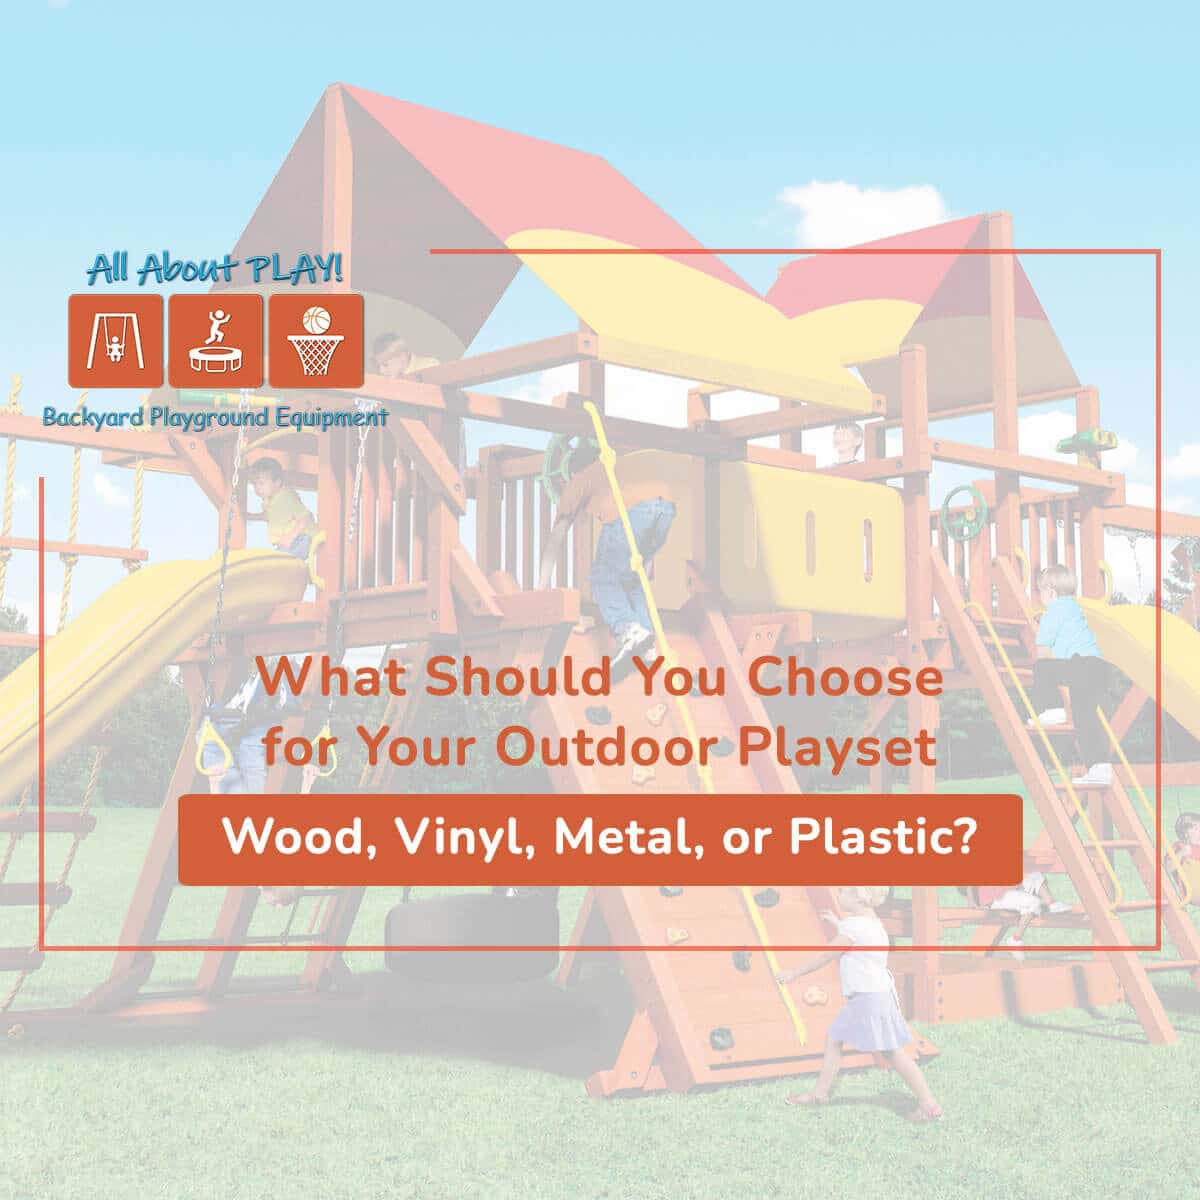 What are the advantages and disadvantages of Wood, Vinyl, Metal, and Plastic playsets